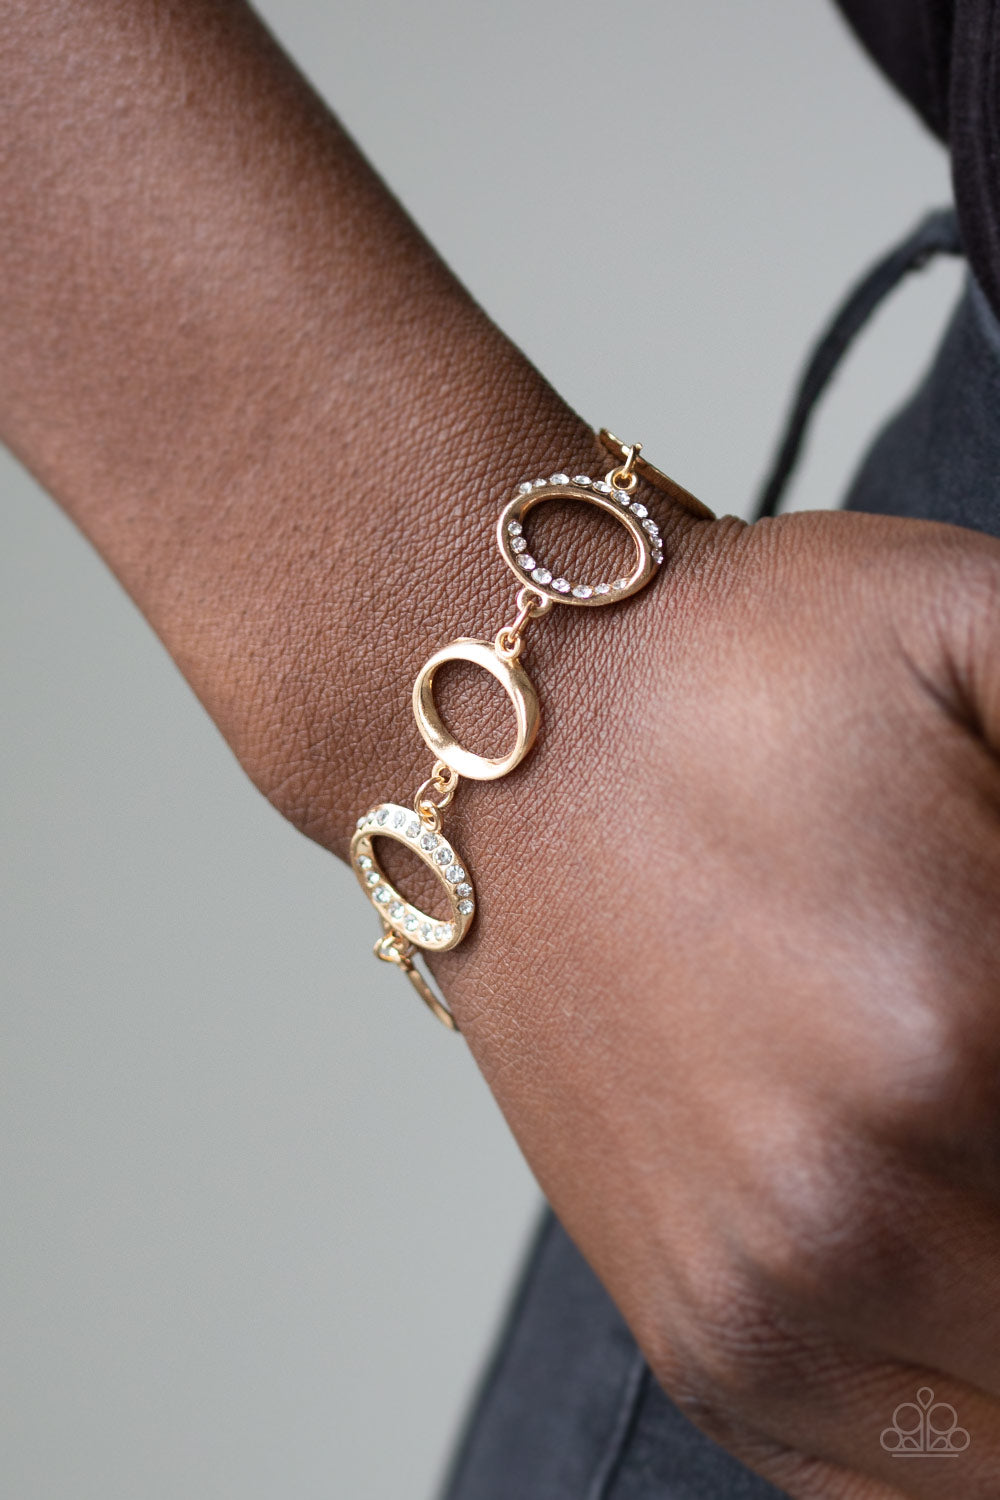 Beautiful Inside and Out - Gold Bracelet